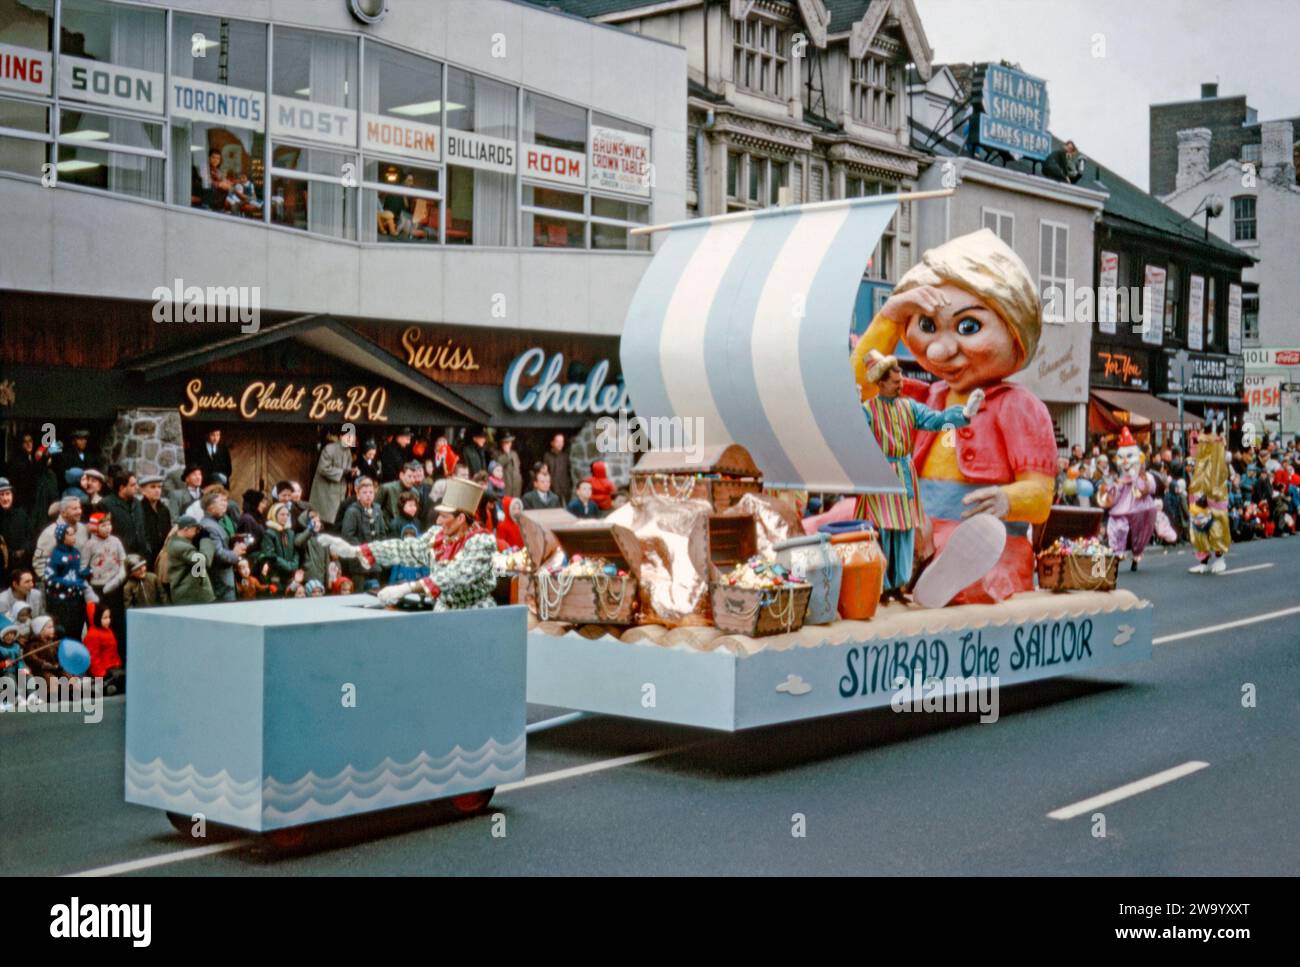 A parade float taking part in Eaton's Santa Claus Parade on Yonge Street, Toronto, Ontario, Canada, November 17, 1962. This float features the fictional character Sinbad the Sailor. There are treasure chests of jewels and a giant papier-mache figure of Sinbad wearing a gold turban. Attracting large crowds, the annual Toronto Santa Claus Parade (also known as The Original Santa Claus Parade) was first held in 1905 and is one of the largest in North America and the oldest Santa Claus parade in the world. It used to terminate at the downtown Eaton's store (later the Eaton Centre). Stock Photo